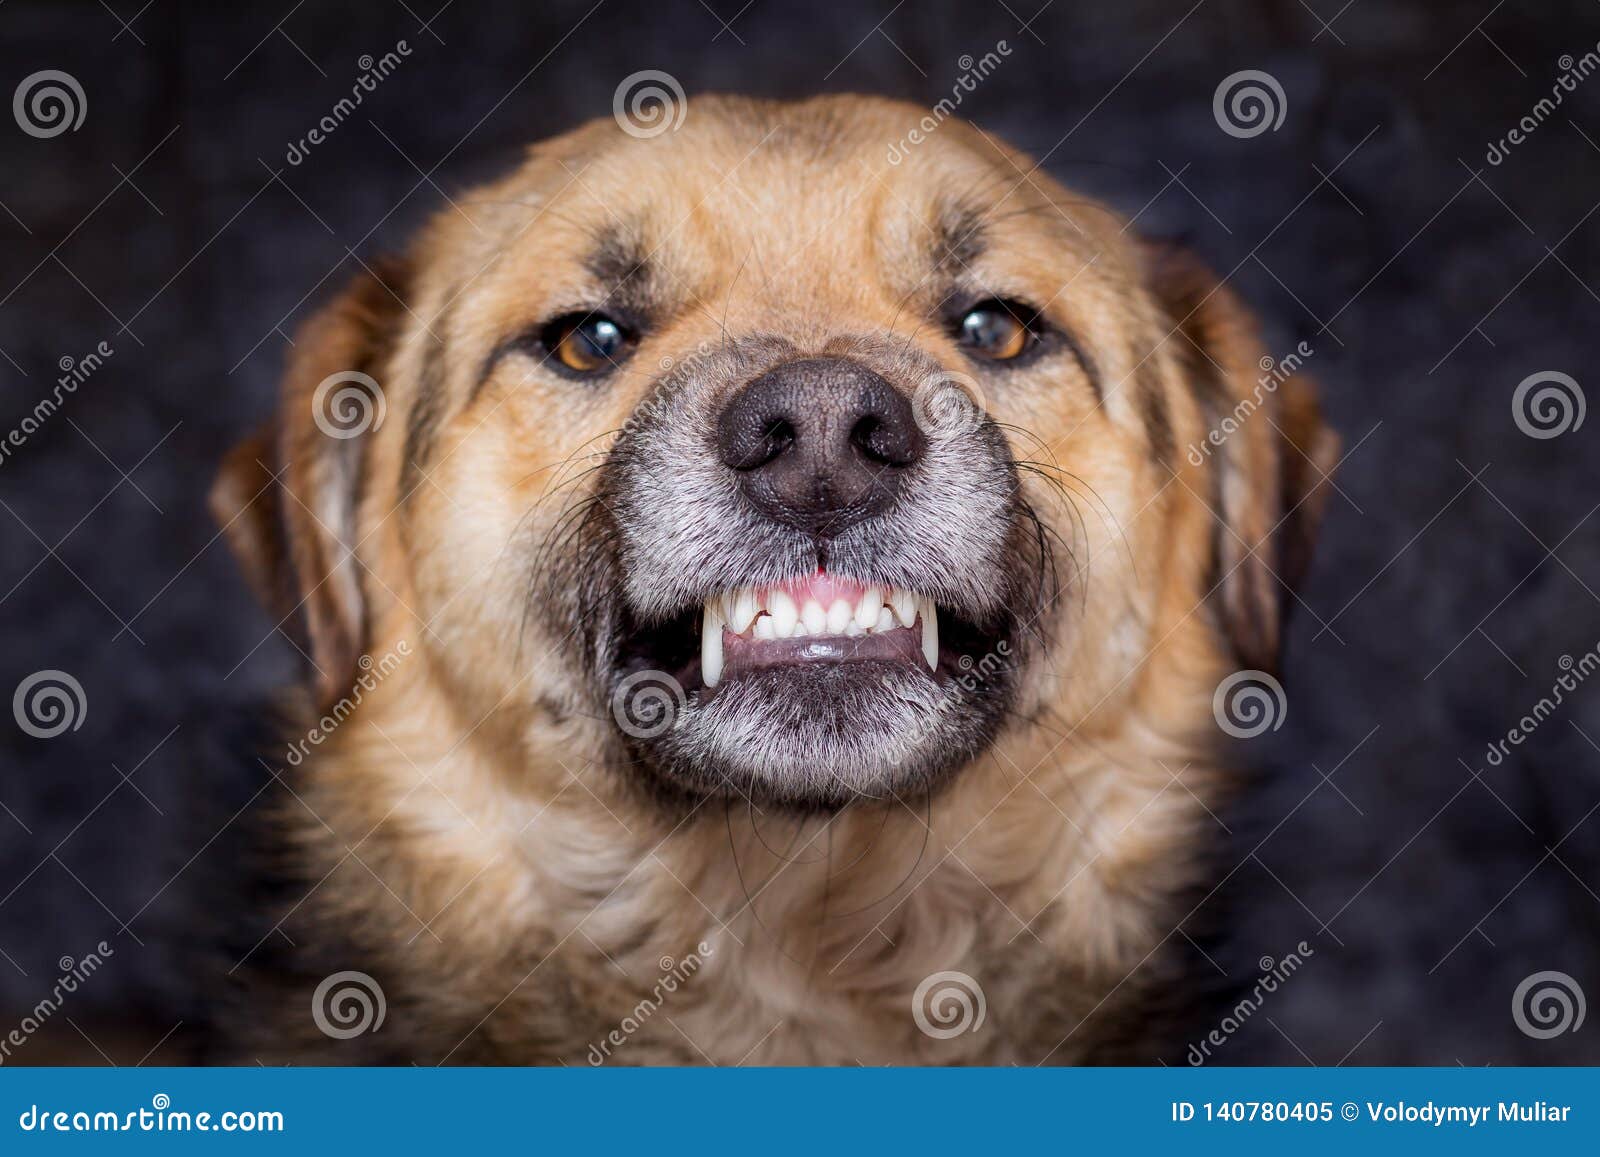 the dog shows teeth. angry dog is ready to bite. caution is an evil dog_